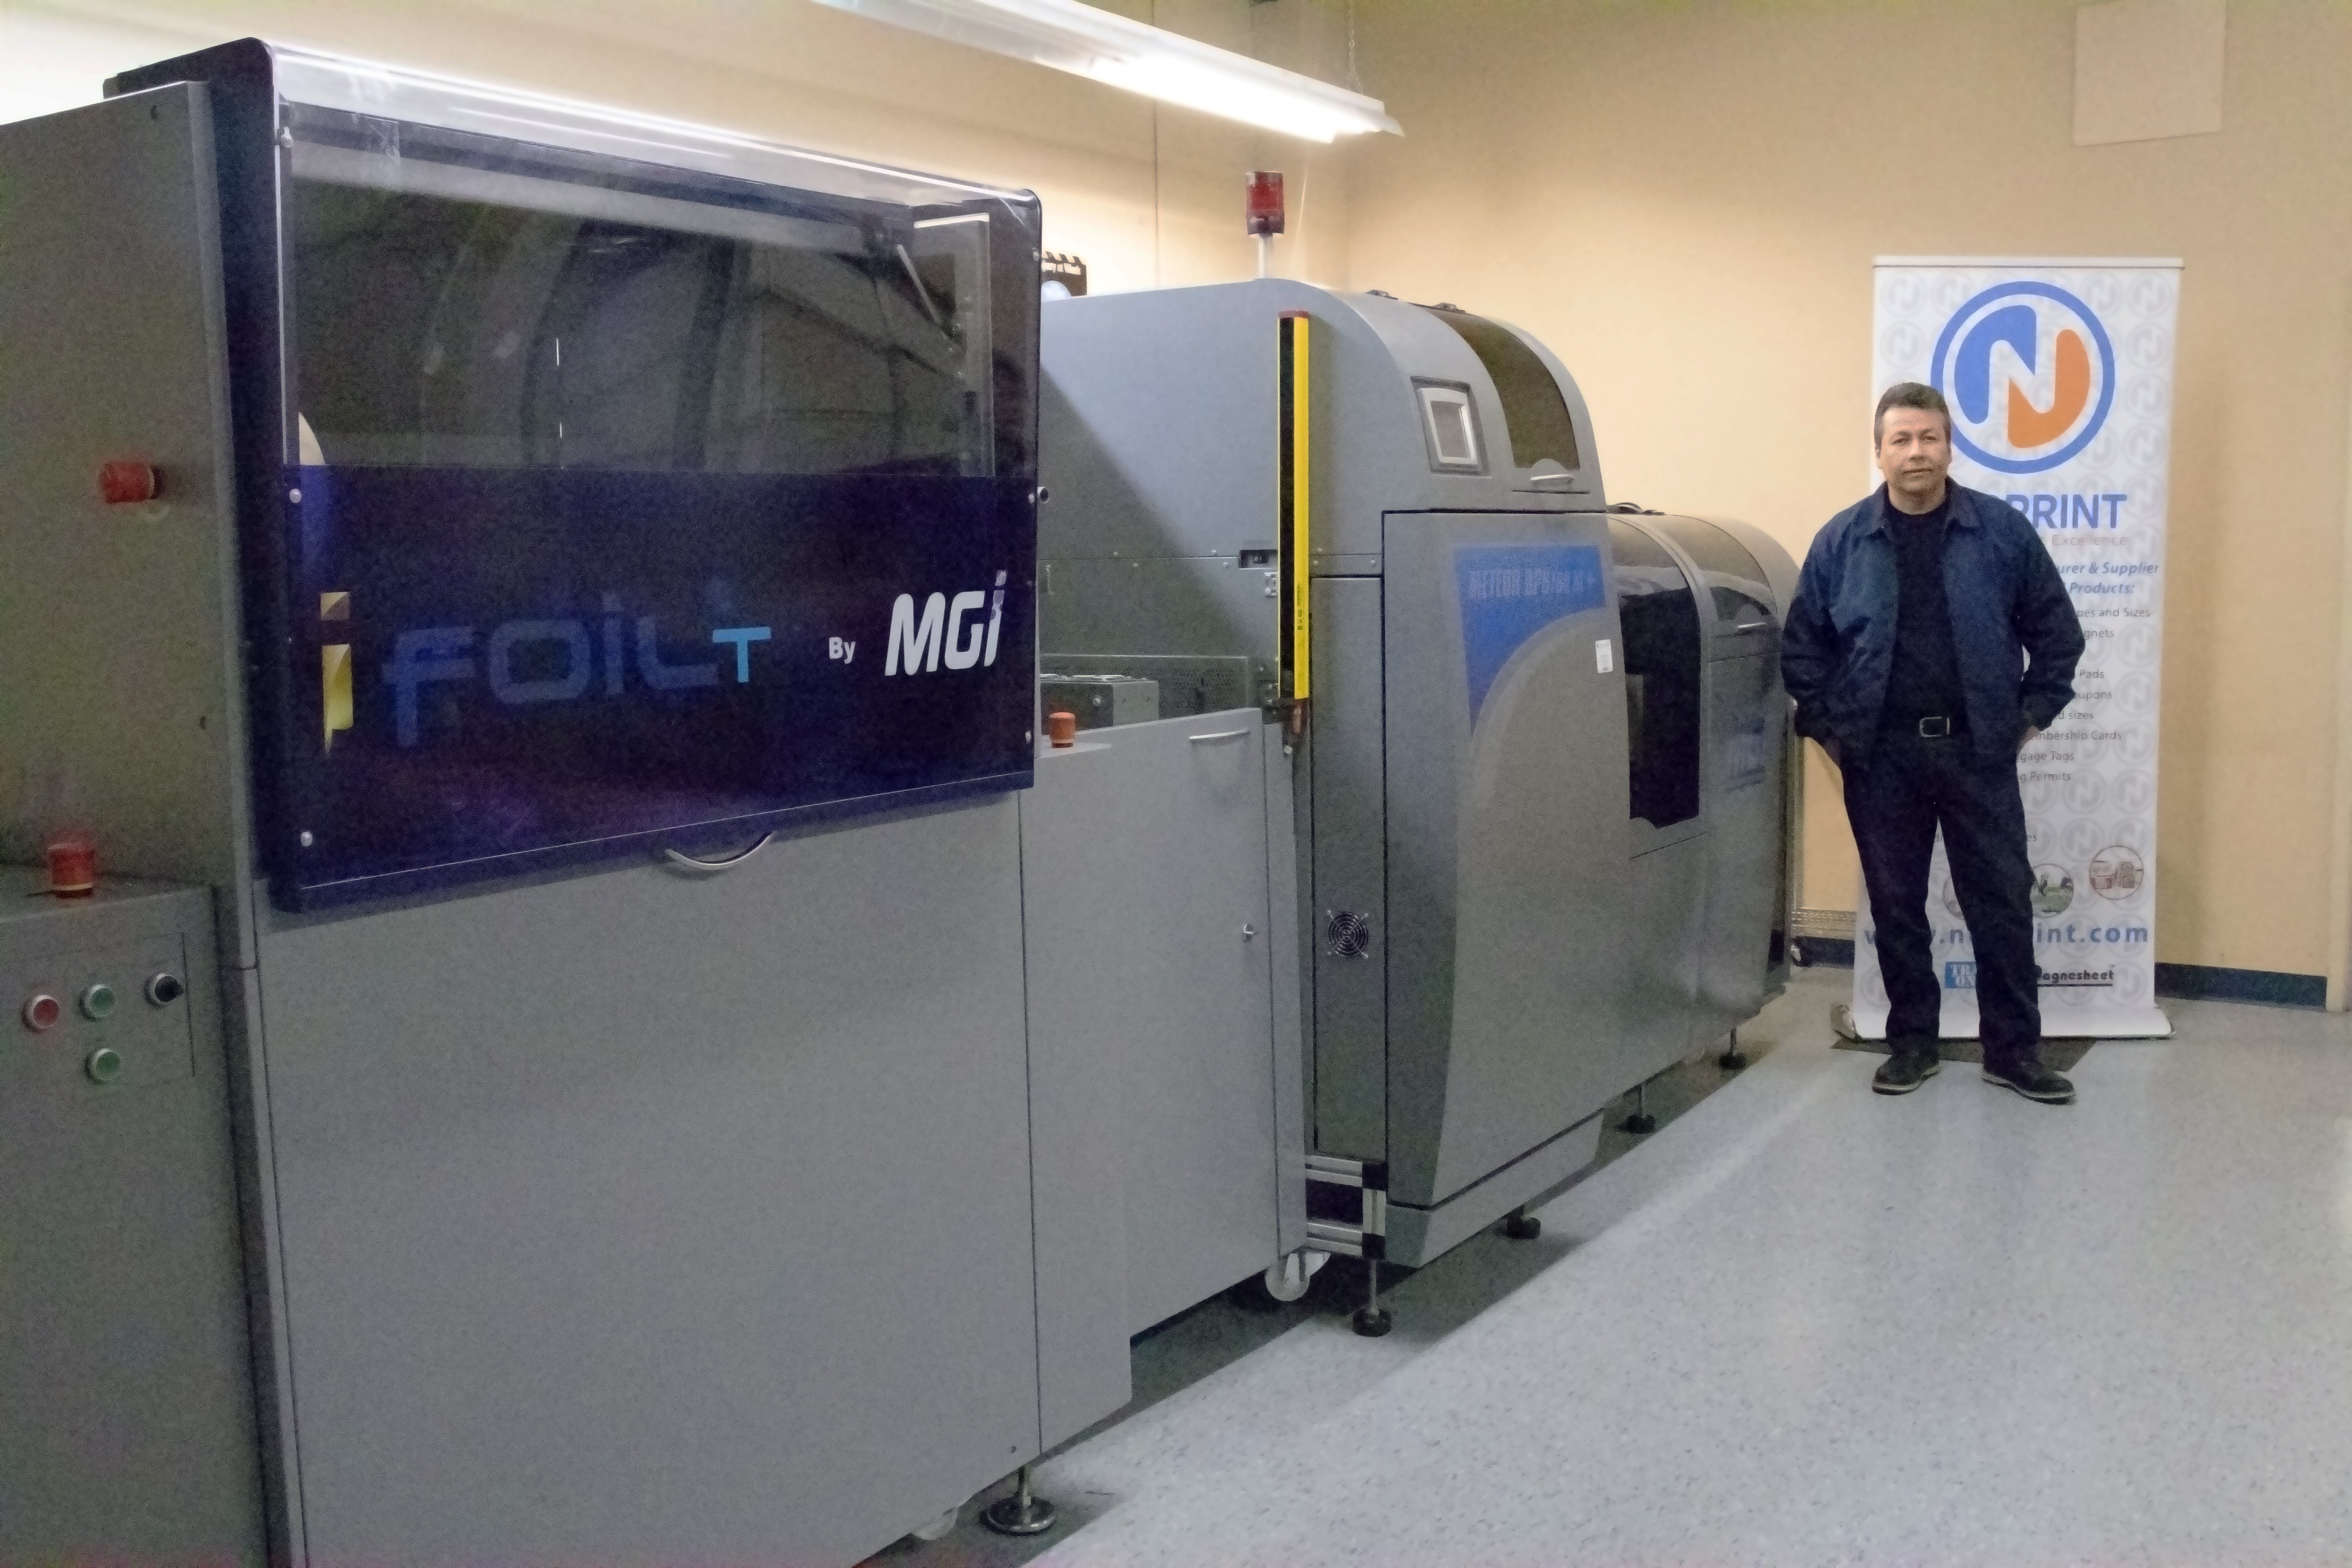 Image of Cesar Cabrera with the MGI Meteor DP8700 XL